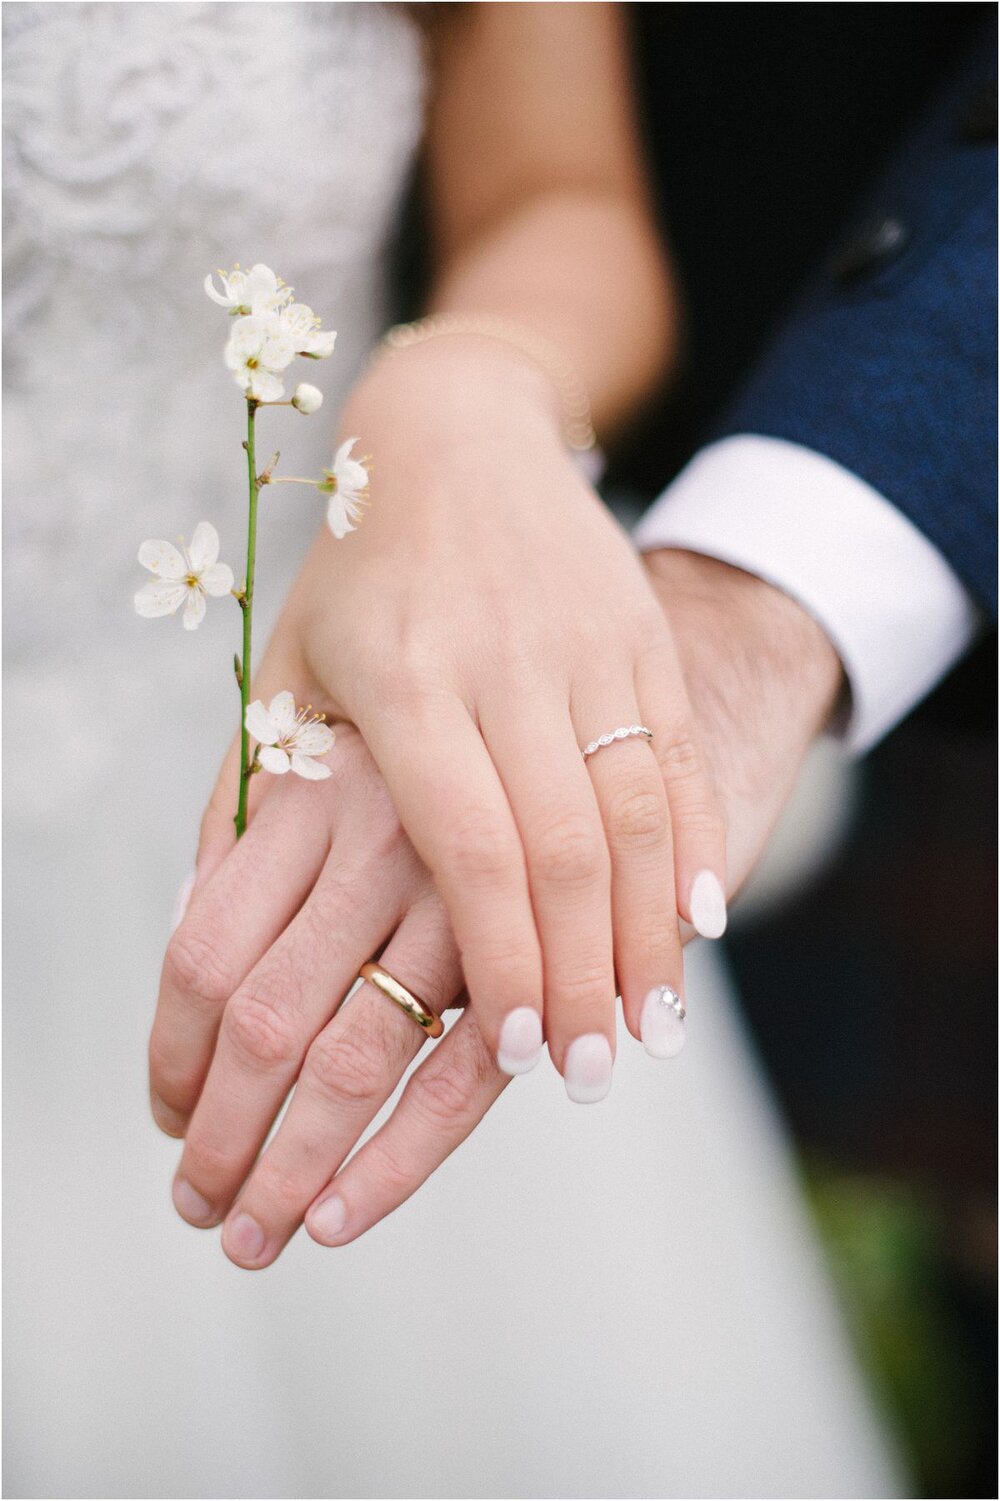  Wedding rings and cherry blossom at The Byre At Inchyra in Perthshire in Scotland by Crofts & Kowalczyk Photography 